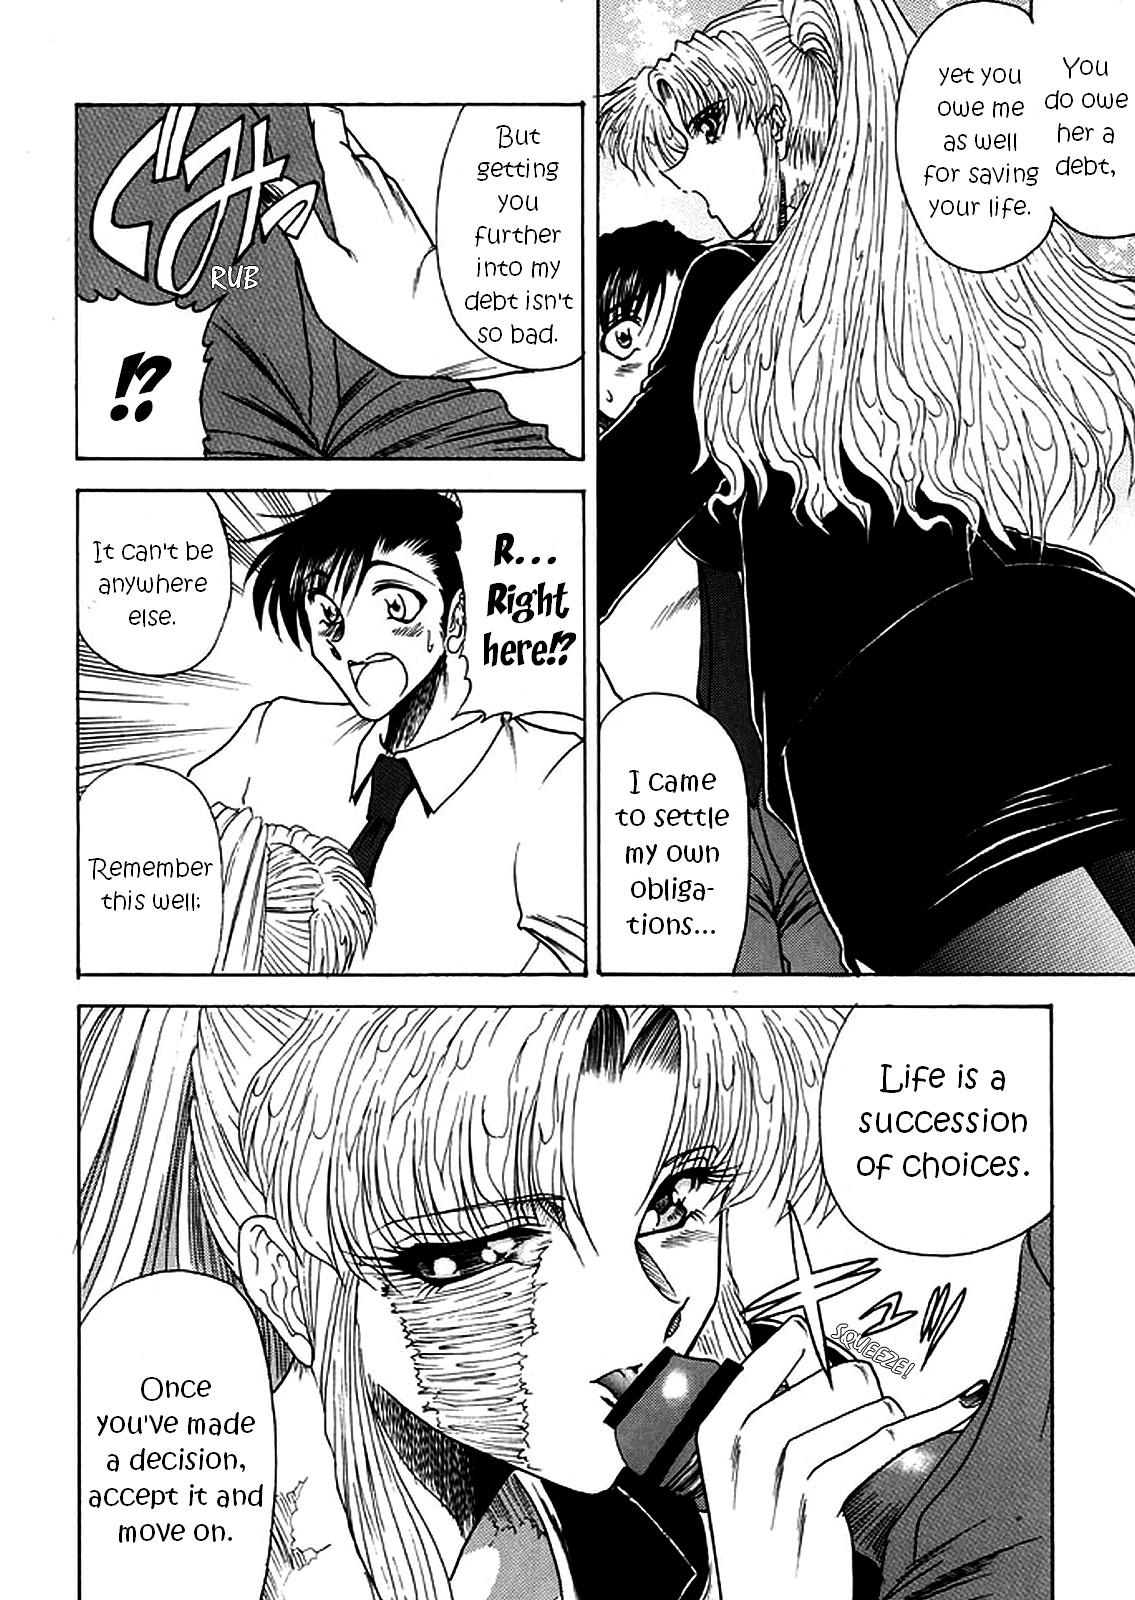 Girls Fucking ZONE 40 A shot of the requiem - Black lagoon Fuck Pussy - Page 12